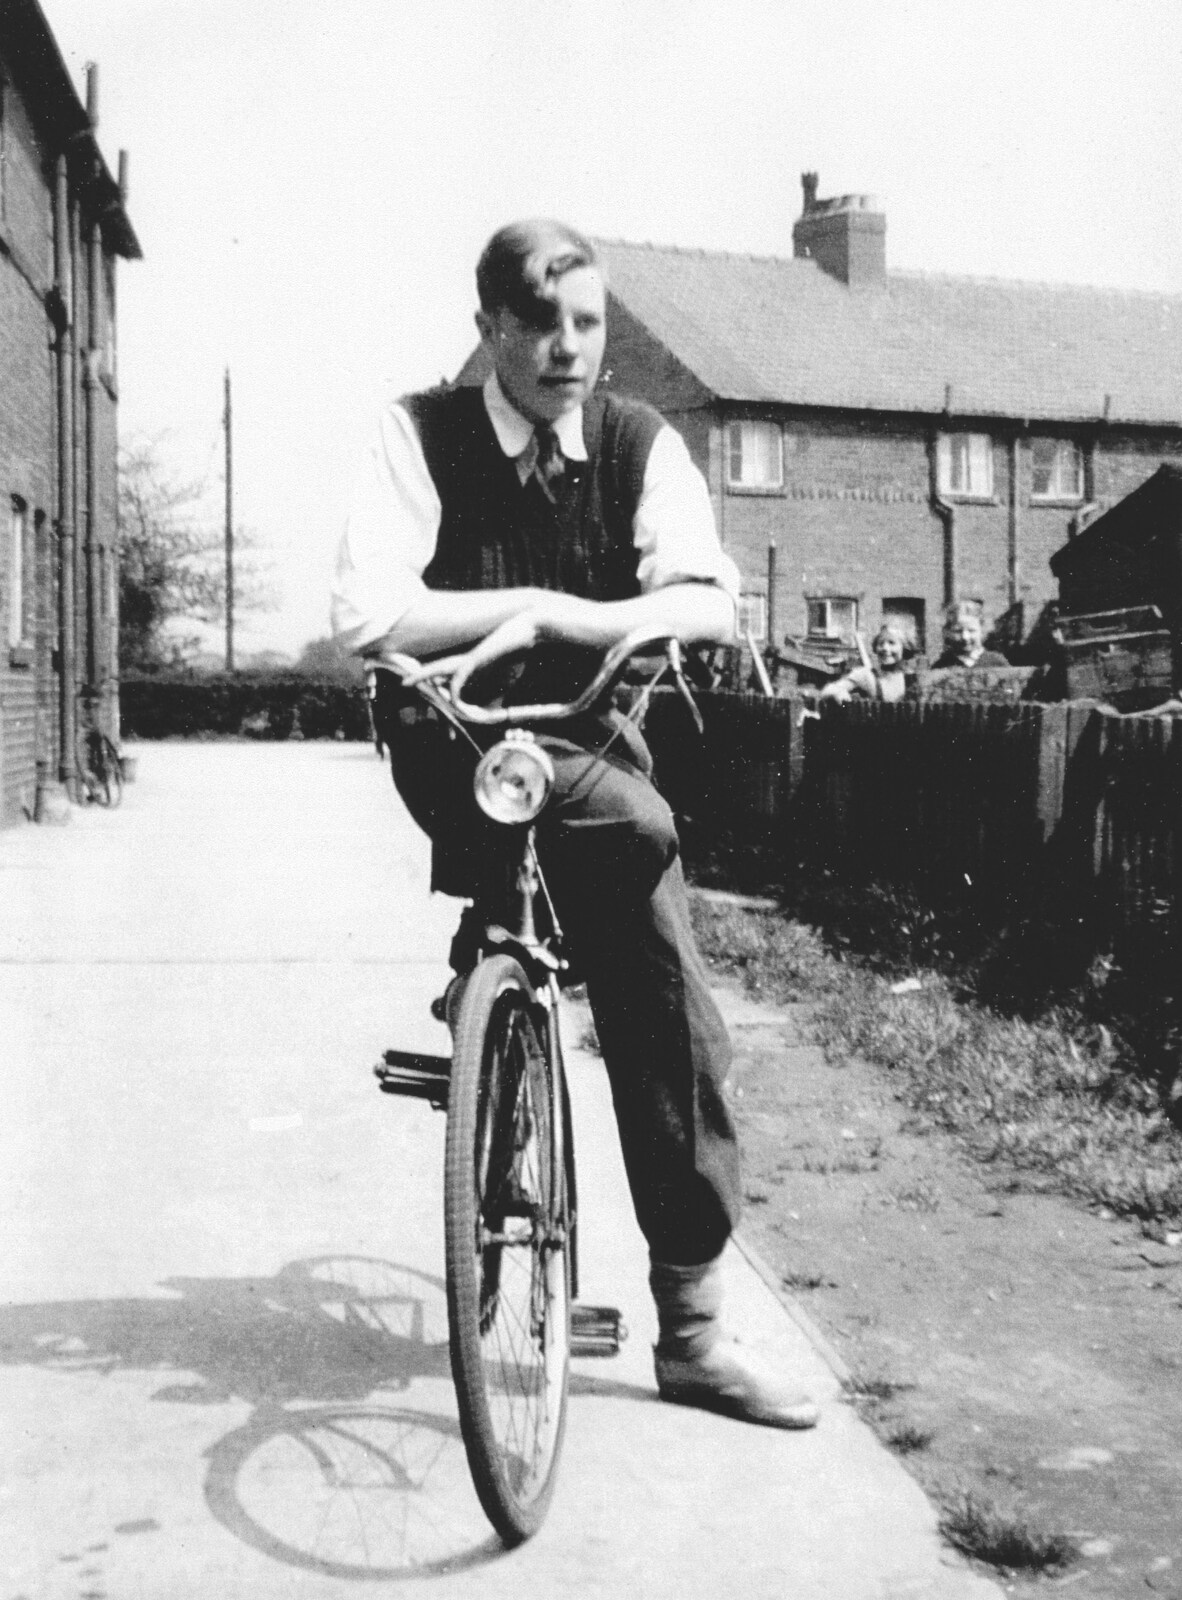 The Grandad Archive, Various Locations - 7th January 2023: Trevor on a bike in Church Fenton, Yorkshire